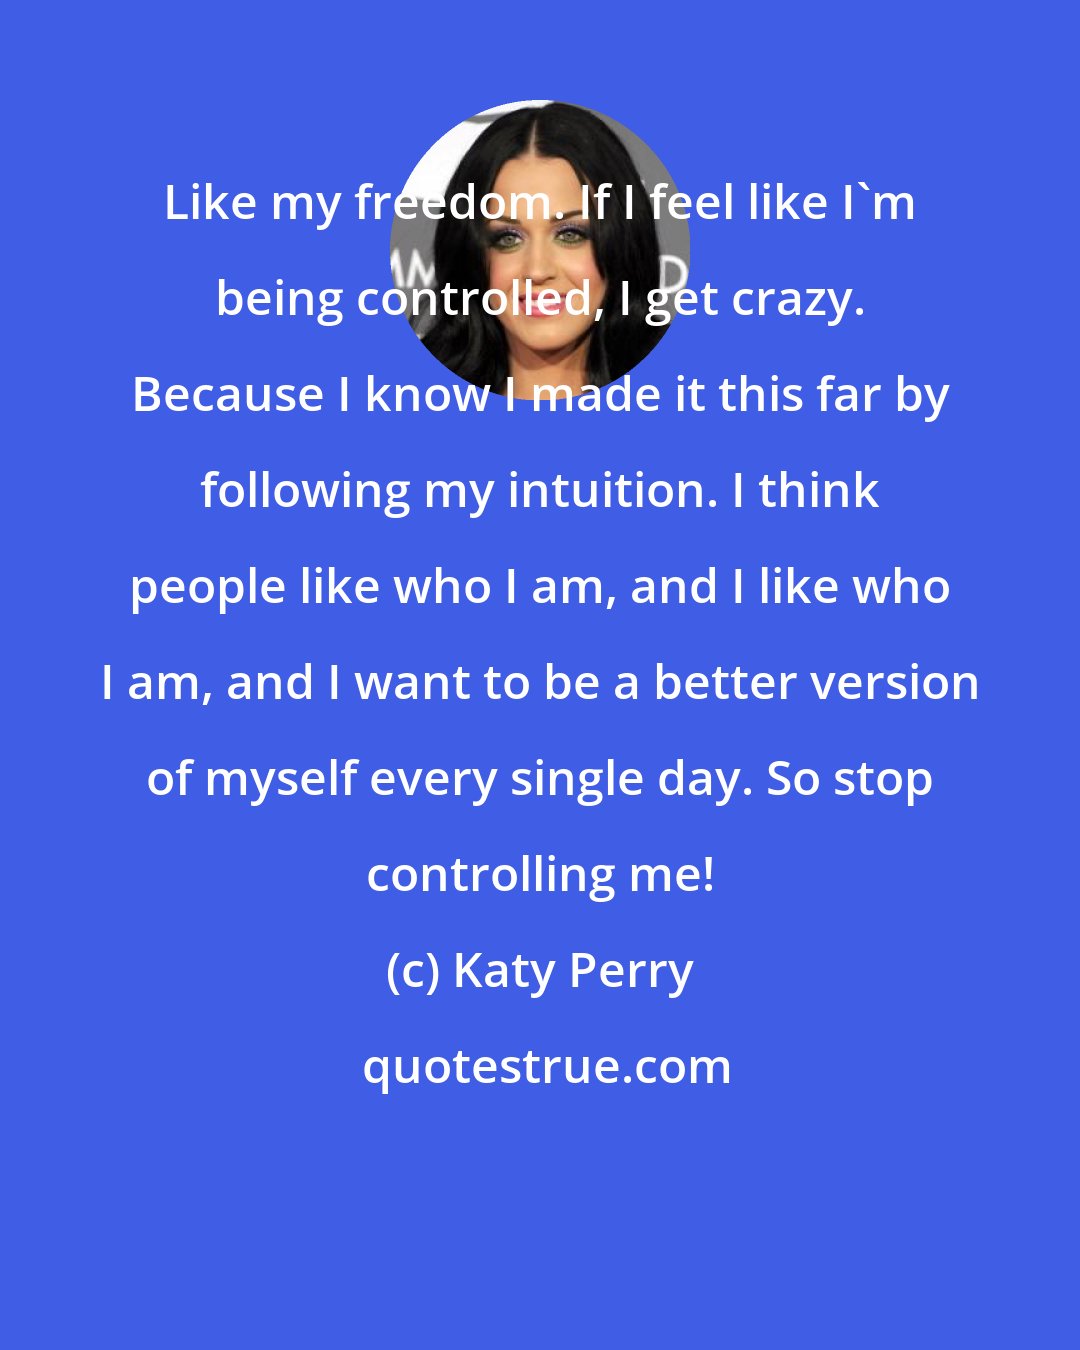 Katy Perry: Like my freedom. If I feel like I'm being controlled, I get crazy. Because I know I made it this far by following my intuition. I think people like who I am, and I like who I am, and I want to be a better version of myself every single day. So stop controlling me!